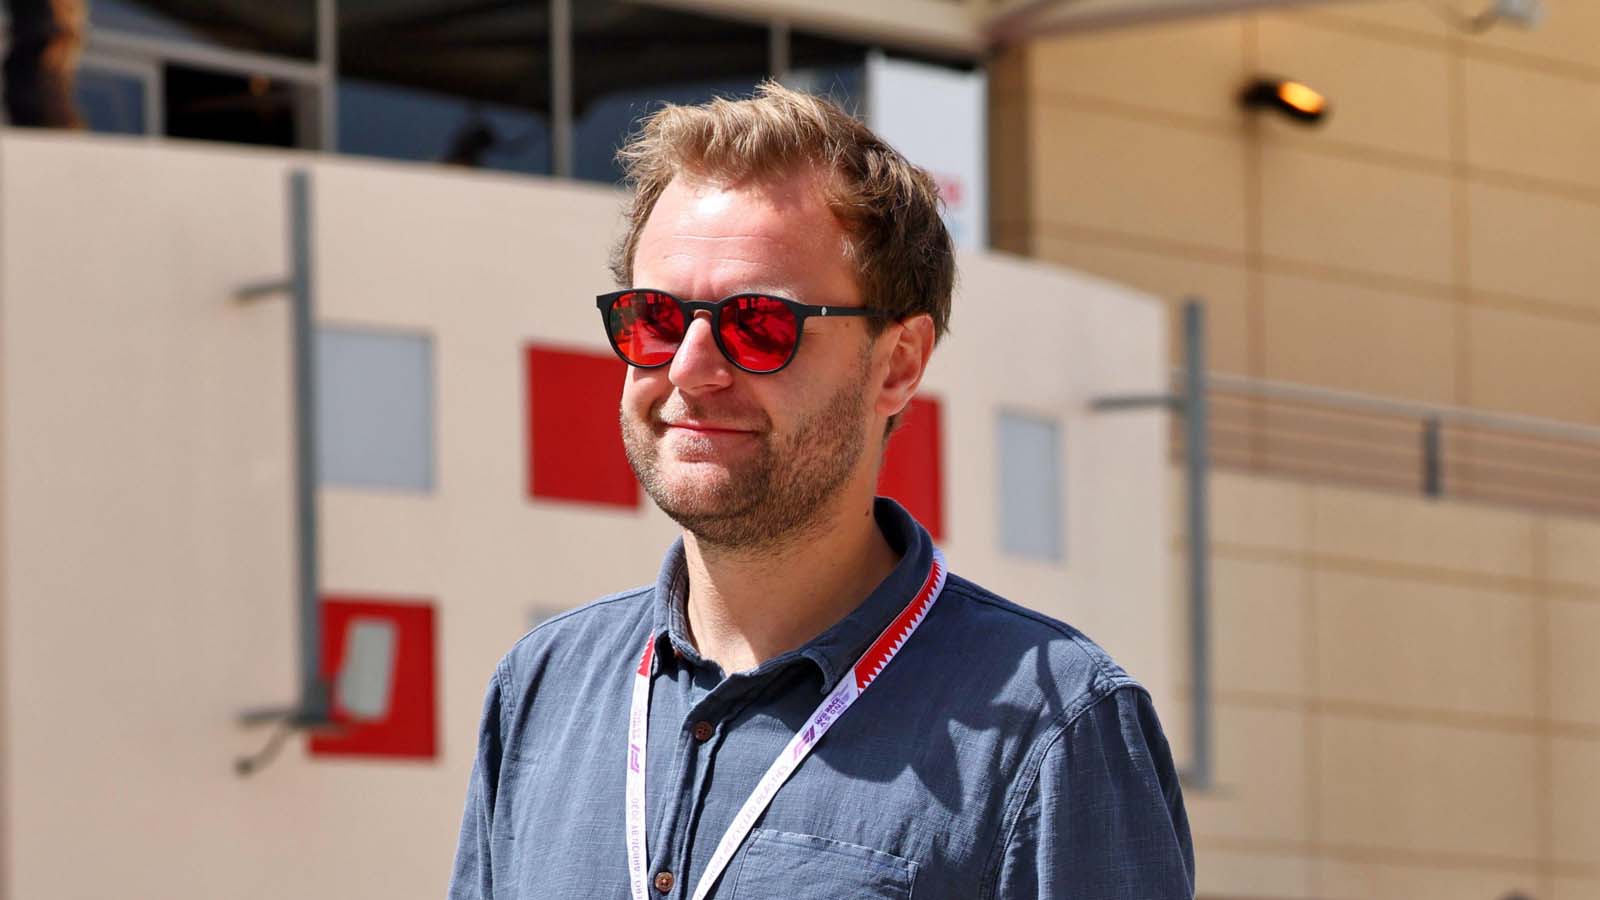 F1 commentator Jack Nicholls sacked by Formula E over inappropriate behaviour PlanetF1